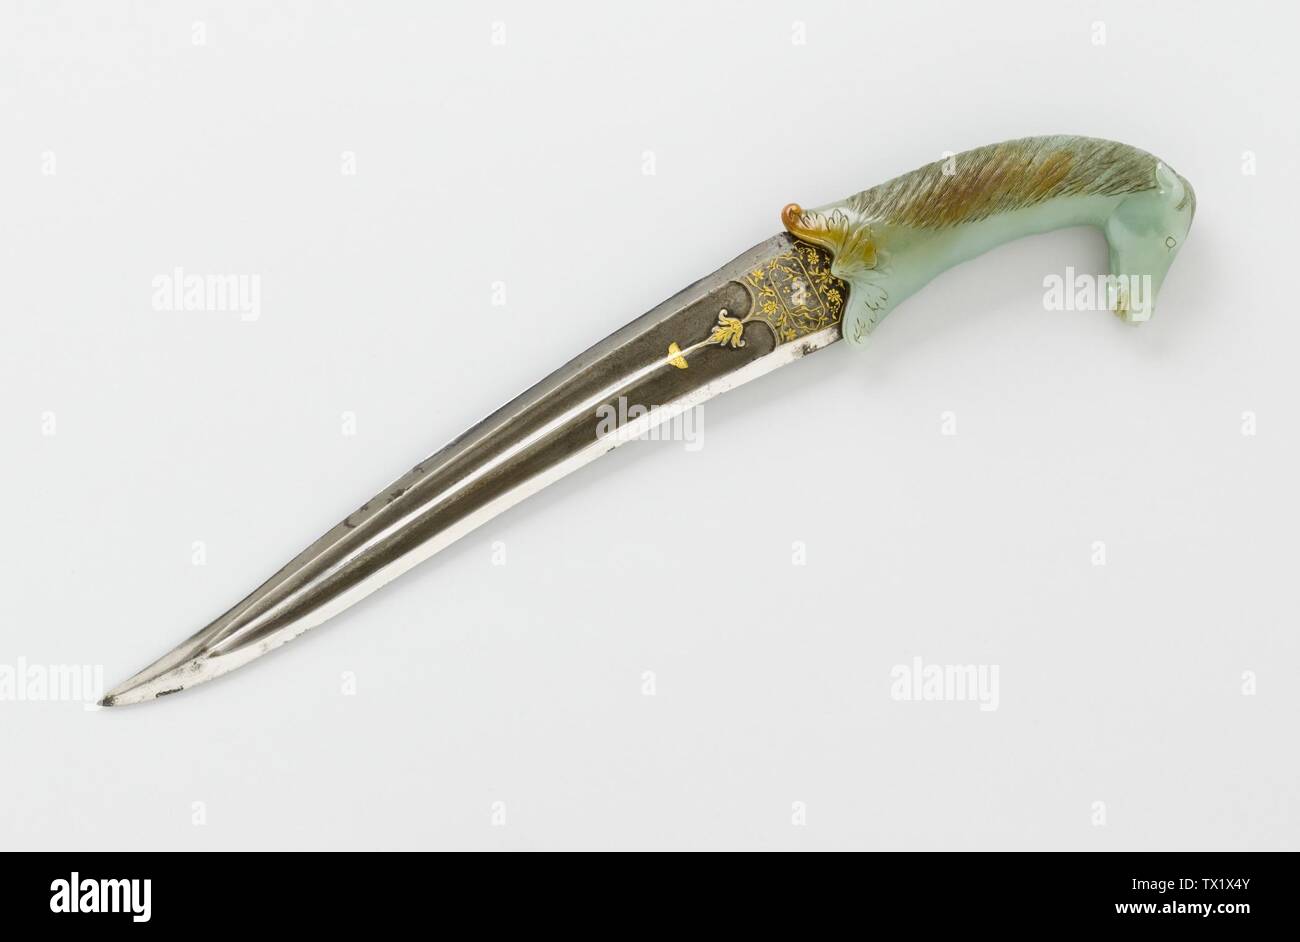 Dagger Khanjar Of Emperor Aurangzeb Reigned 1658a 1707 And Sheath Image 3 Of 9 India Mughal Empire Dated 1660 1661 Arms And Armor Daggers Light Green Nephrite Jade Hilt Steel Blade Inlaid With Gold